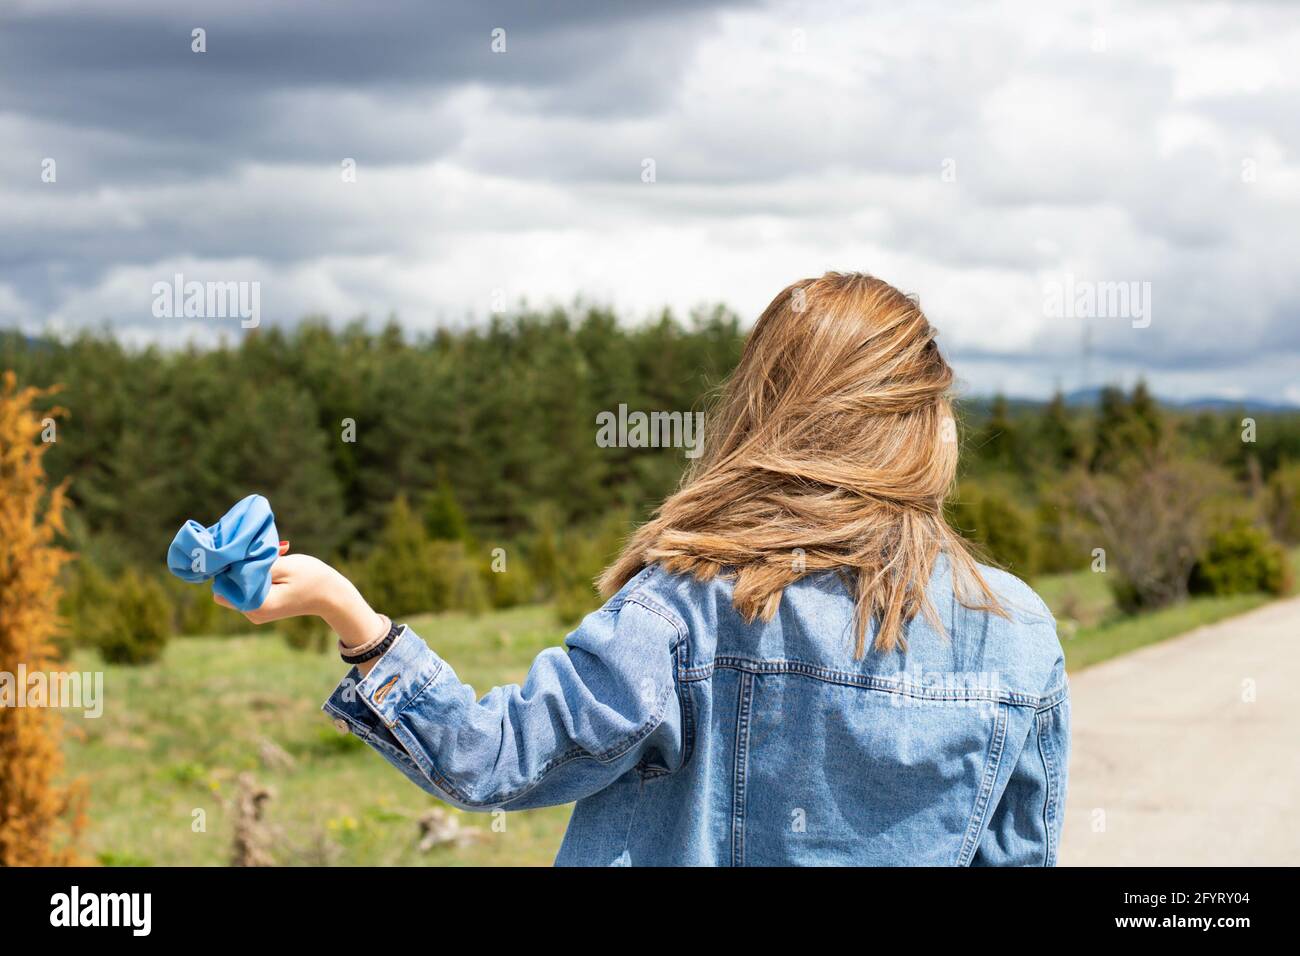 A cute female walking with a blue scrunchie in her hand Stock Photo